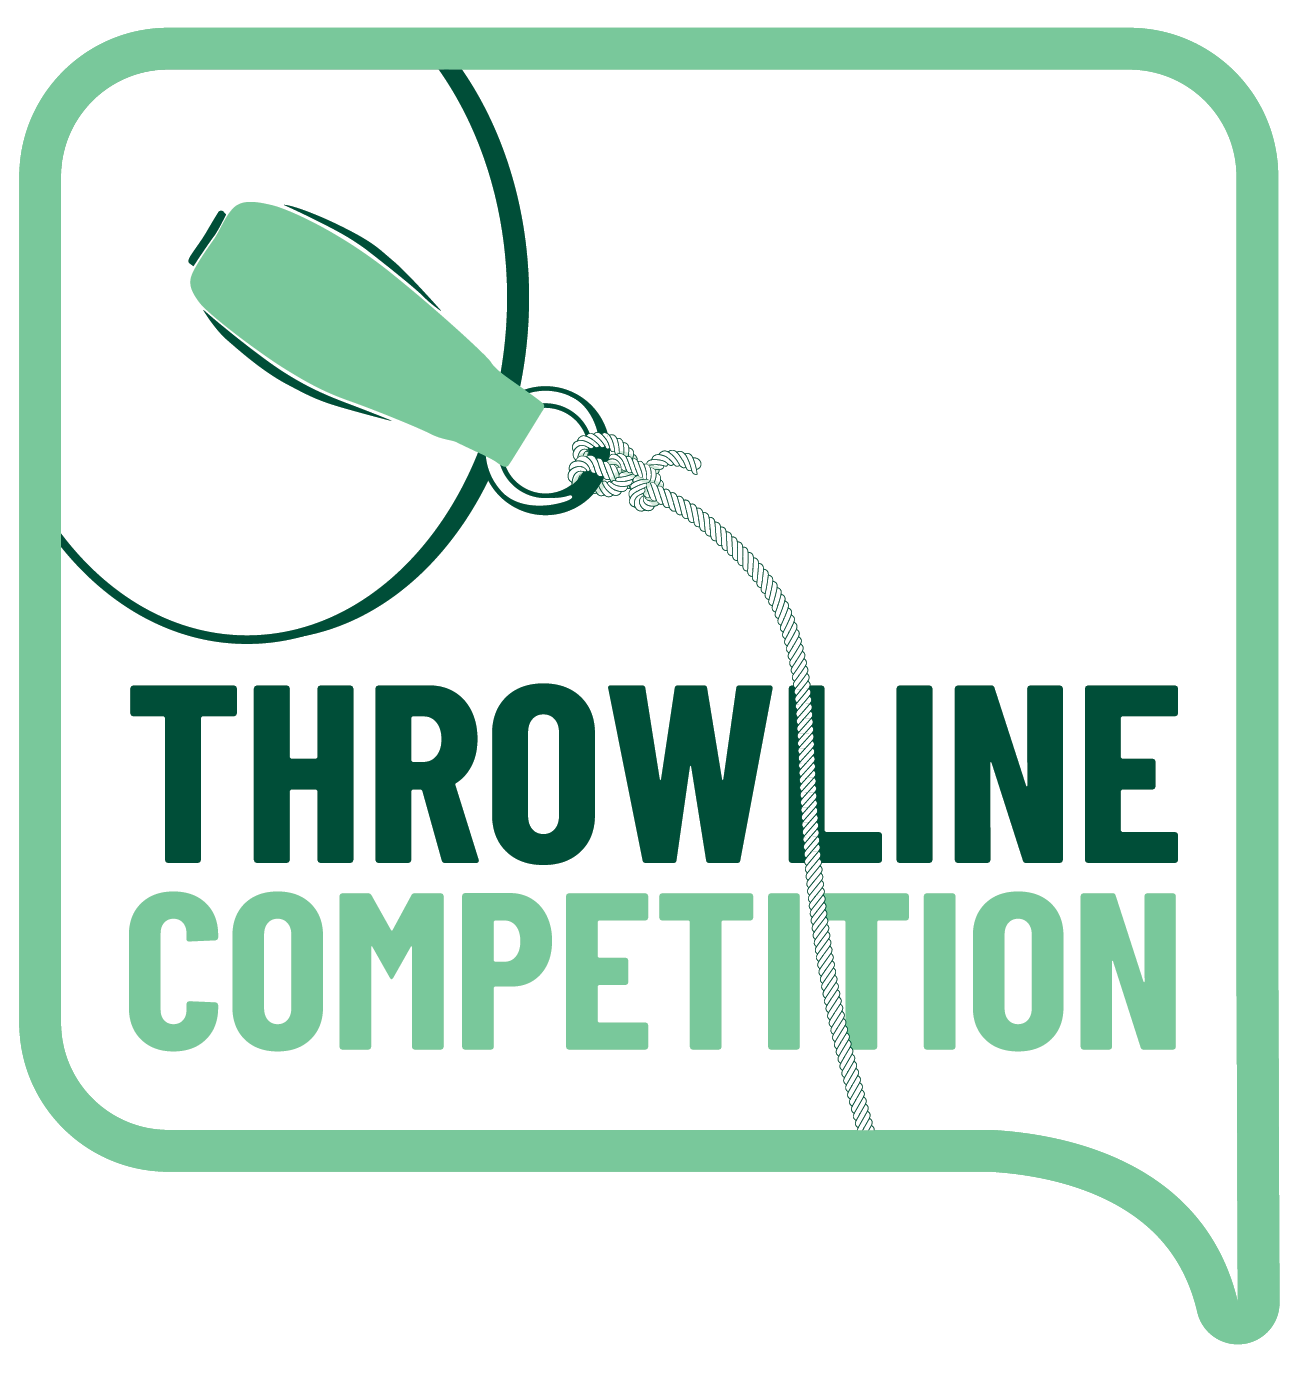 Throwline competition at the ARB Show